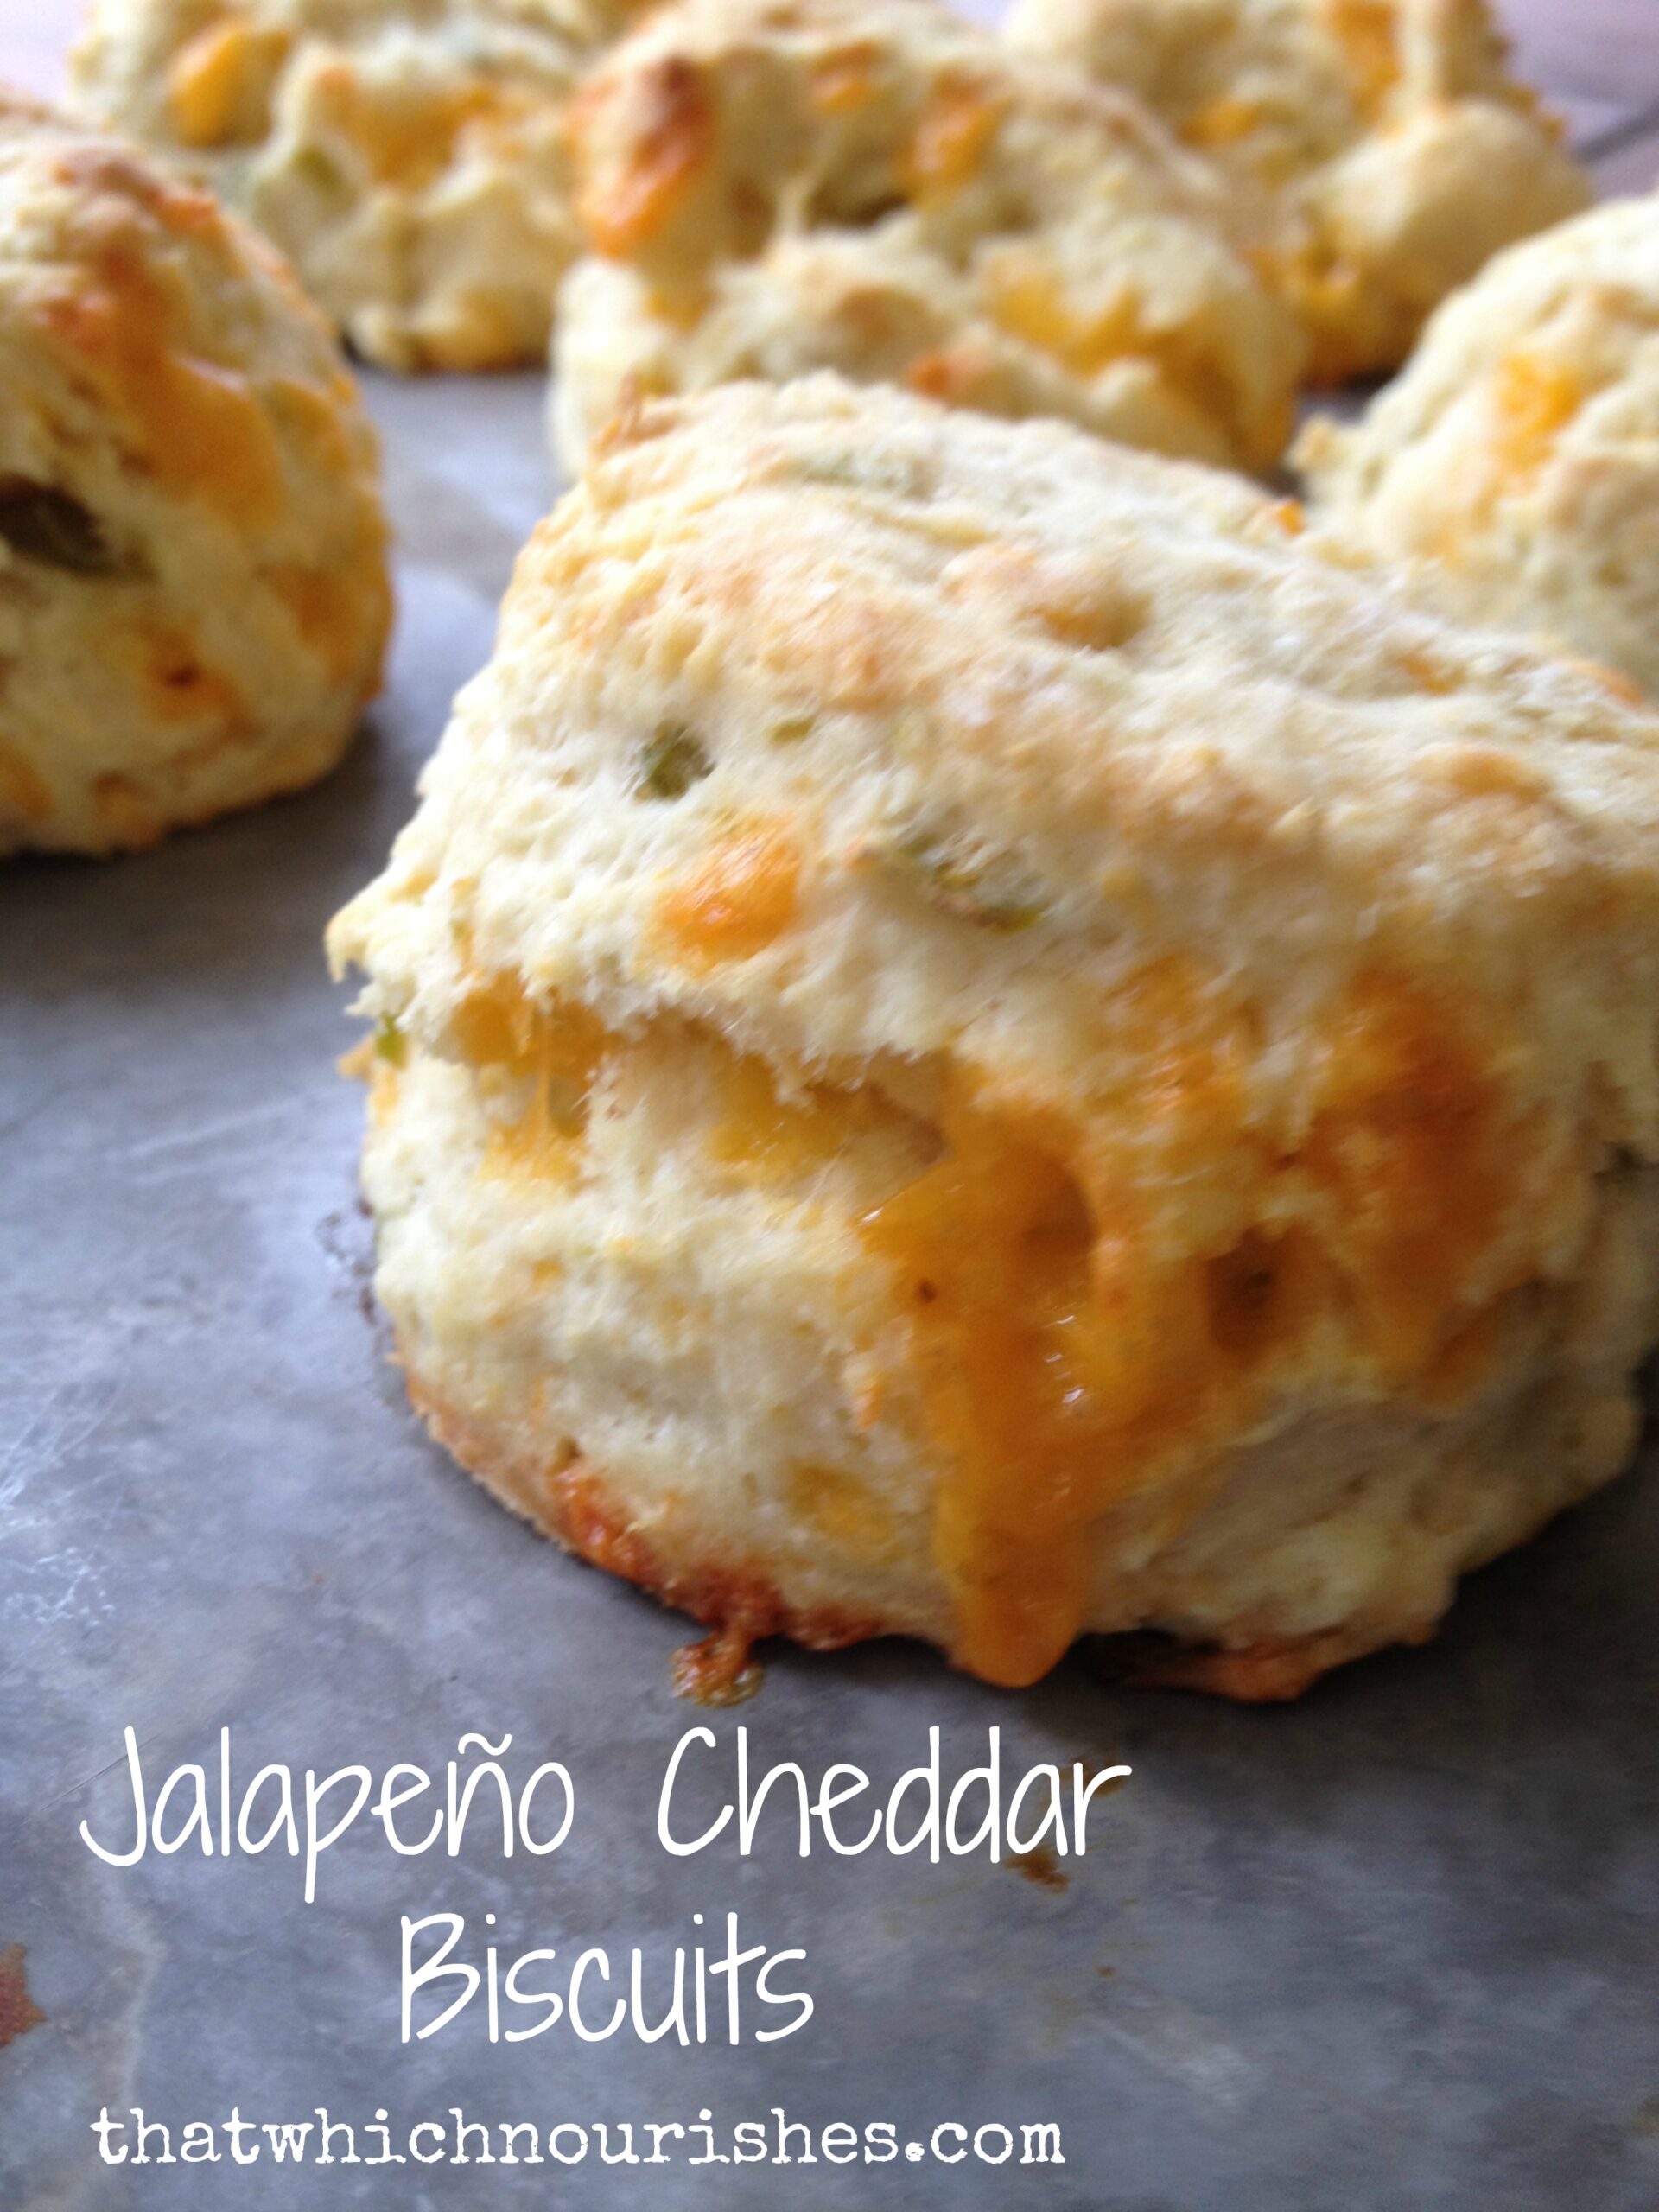 Jalapeño Cheddar Biscuits -- Fluffy, buttery, cheesy bites of yum with goozey cheese and a kick of spice with bits of jalapeños. Spicy, buttery, perfectly fluffy biscuits. | thatwhichnourishes.com